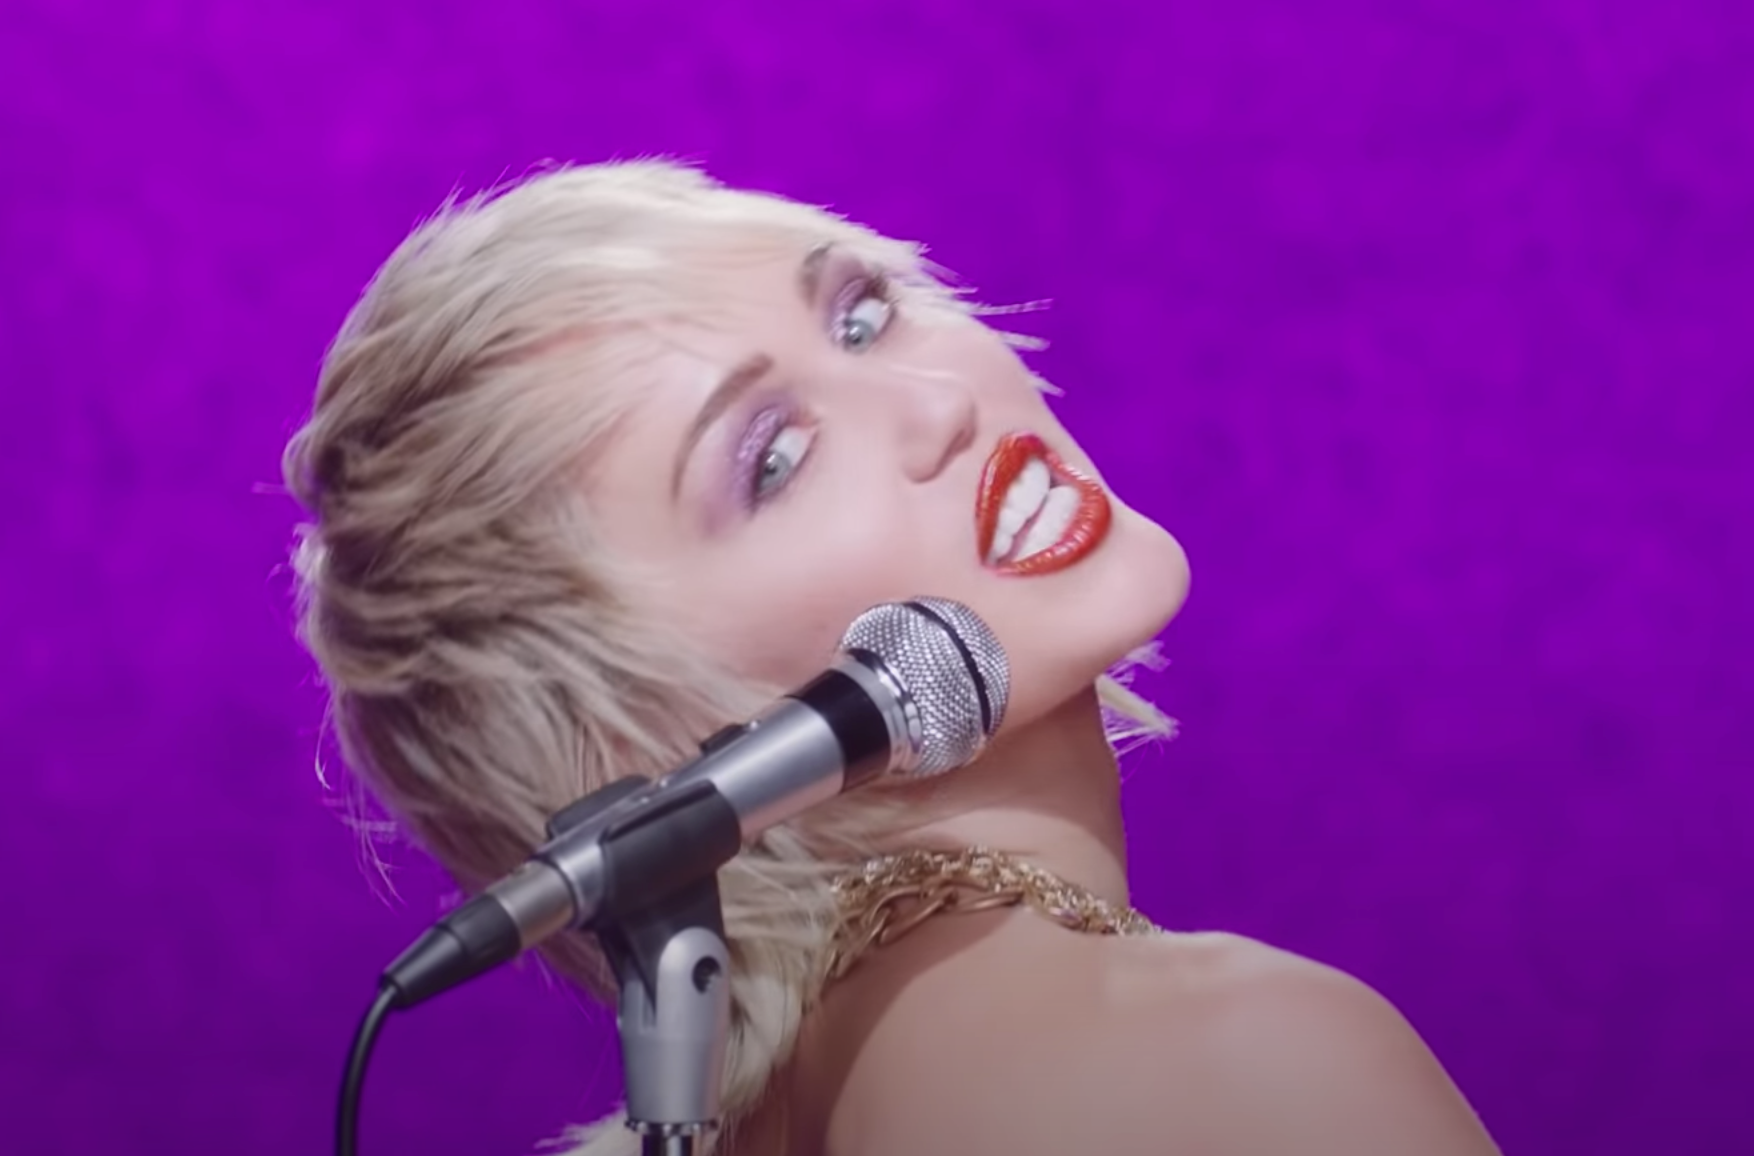 Miley Cyrus review, Plastic Hearts: A truckload of fun, brimming with Cyrus’s rec...